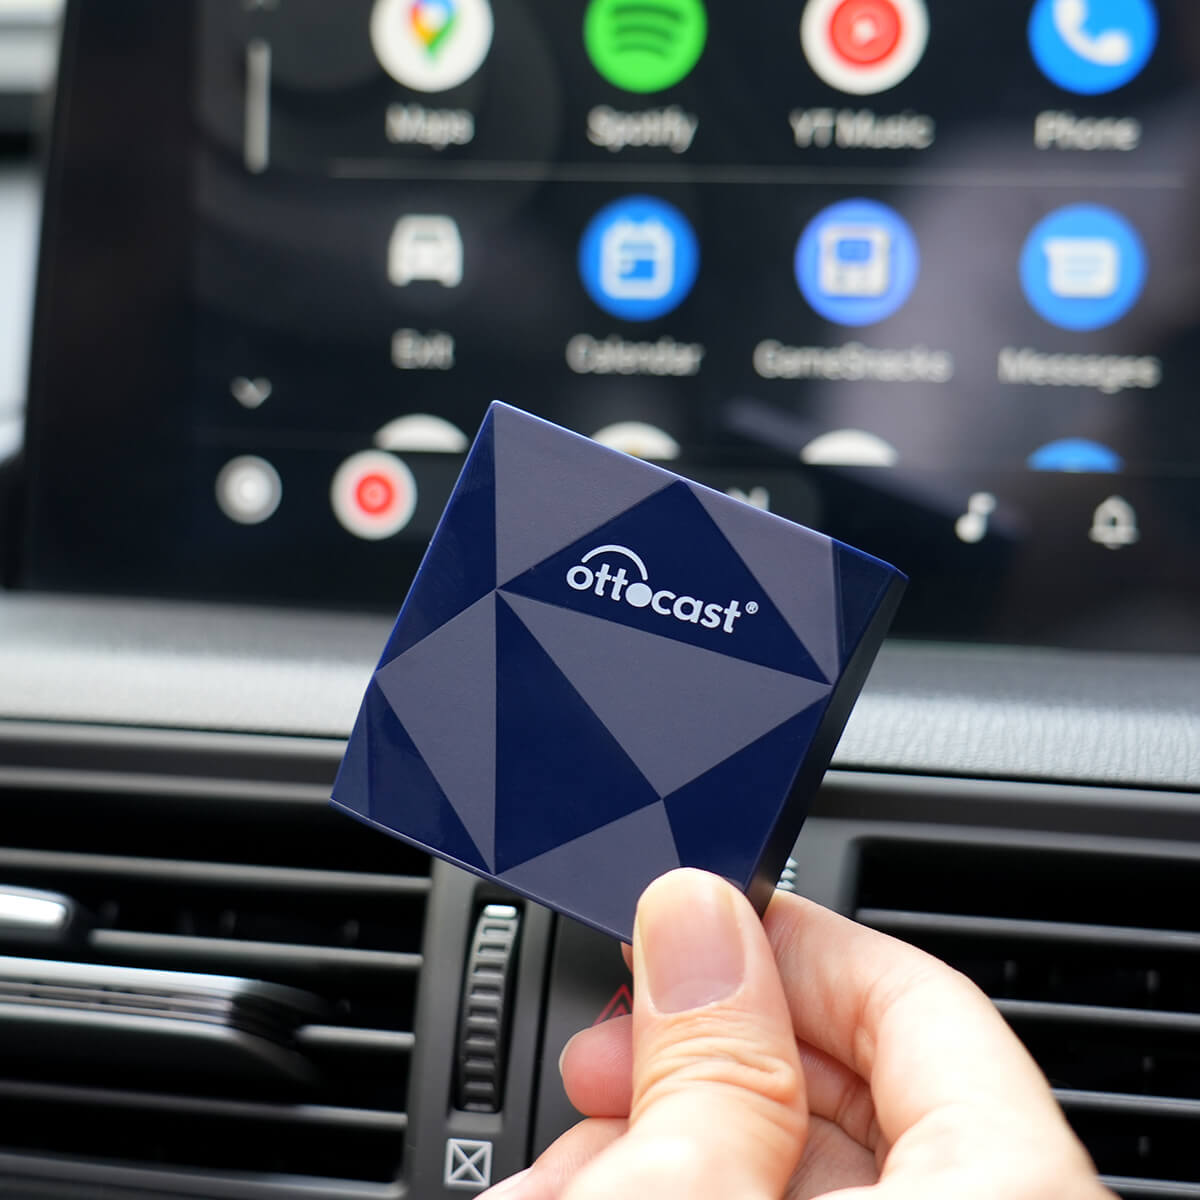 android auto wireless dongle